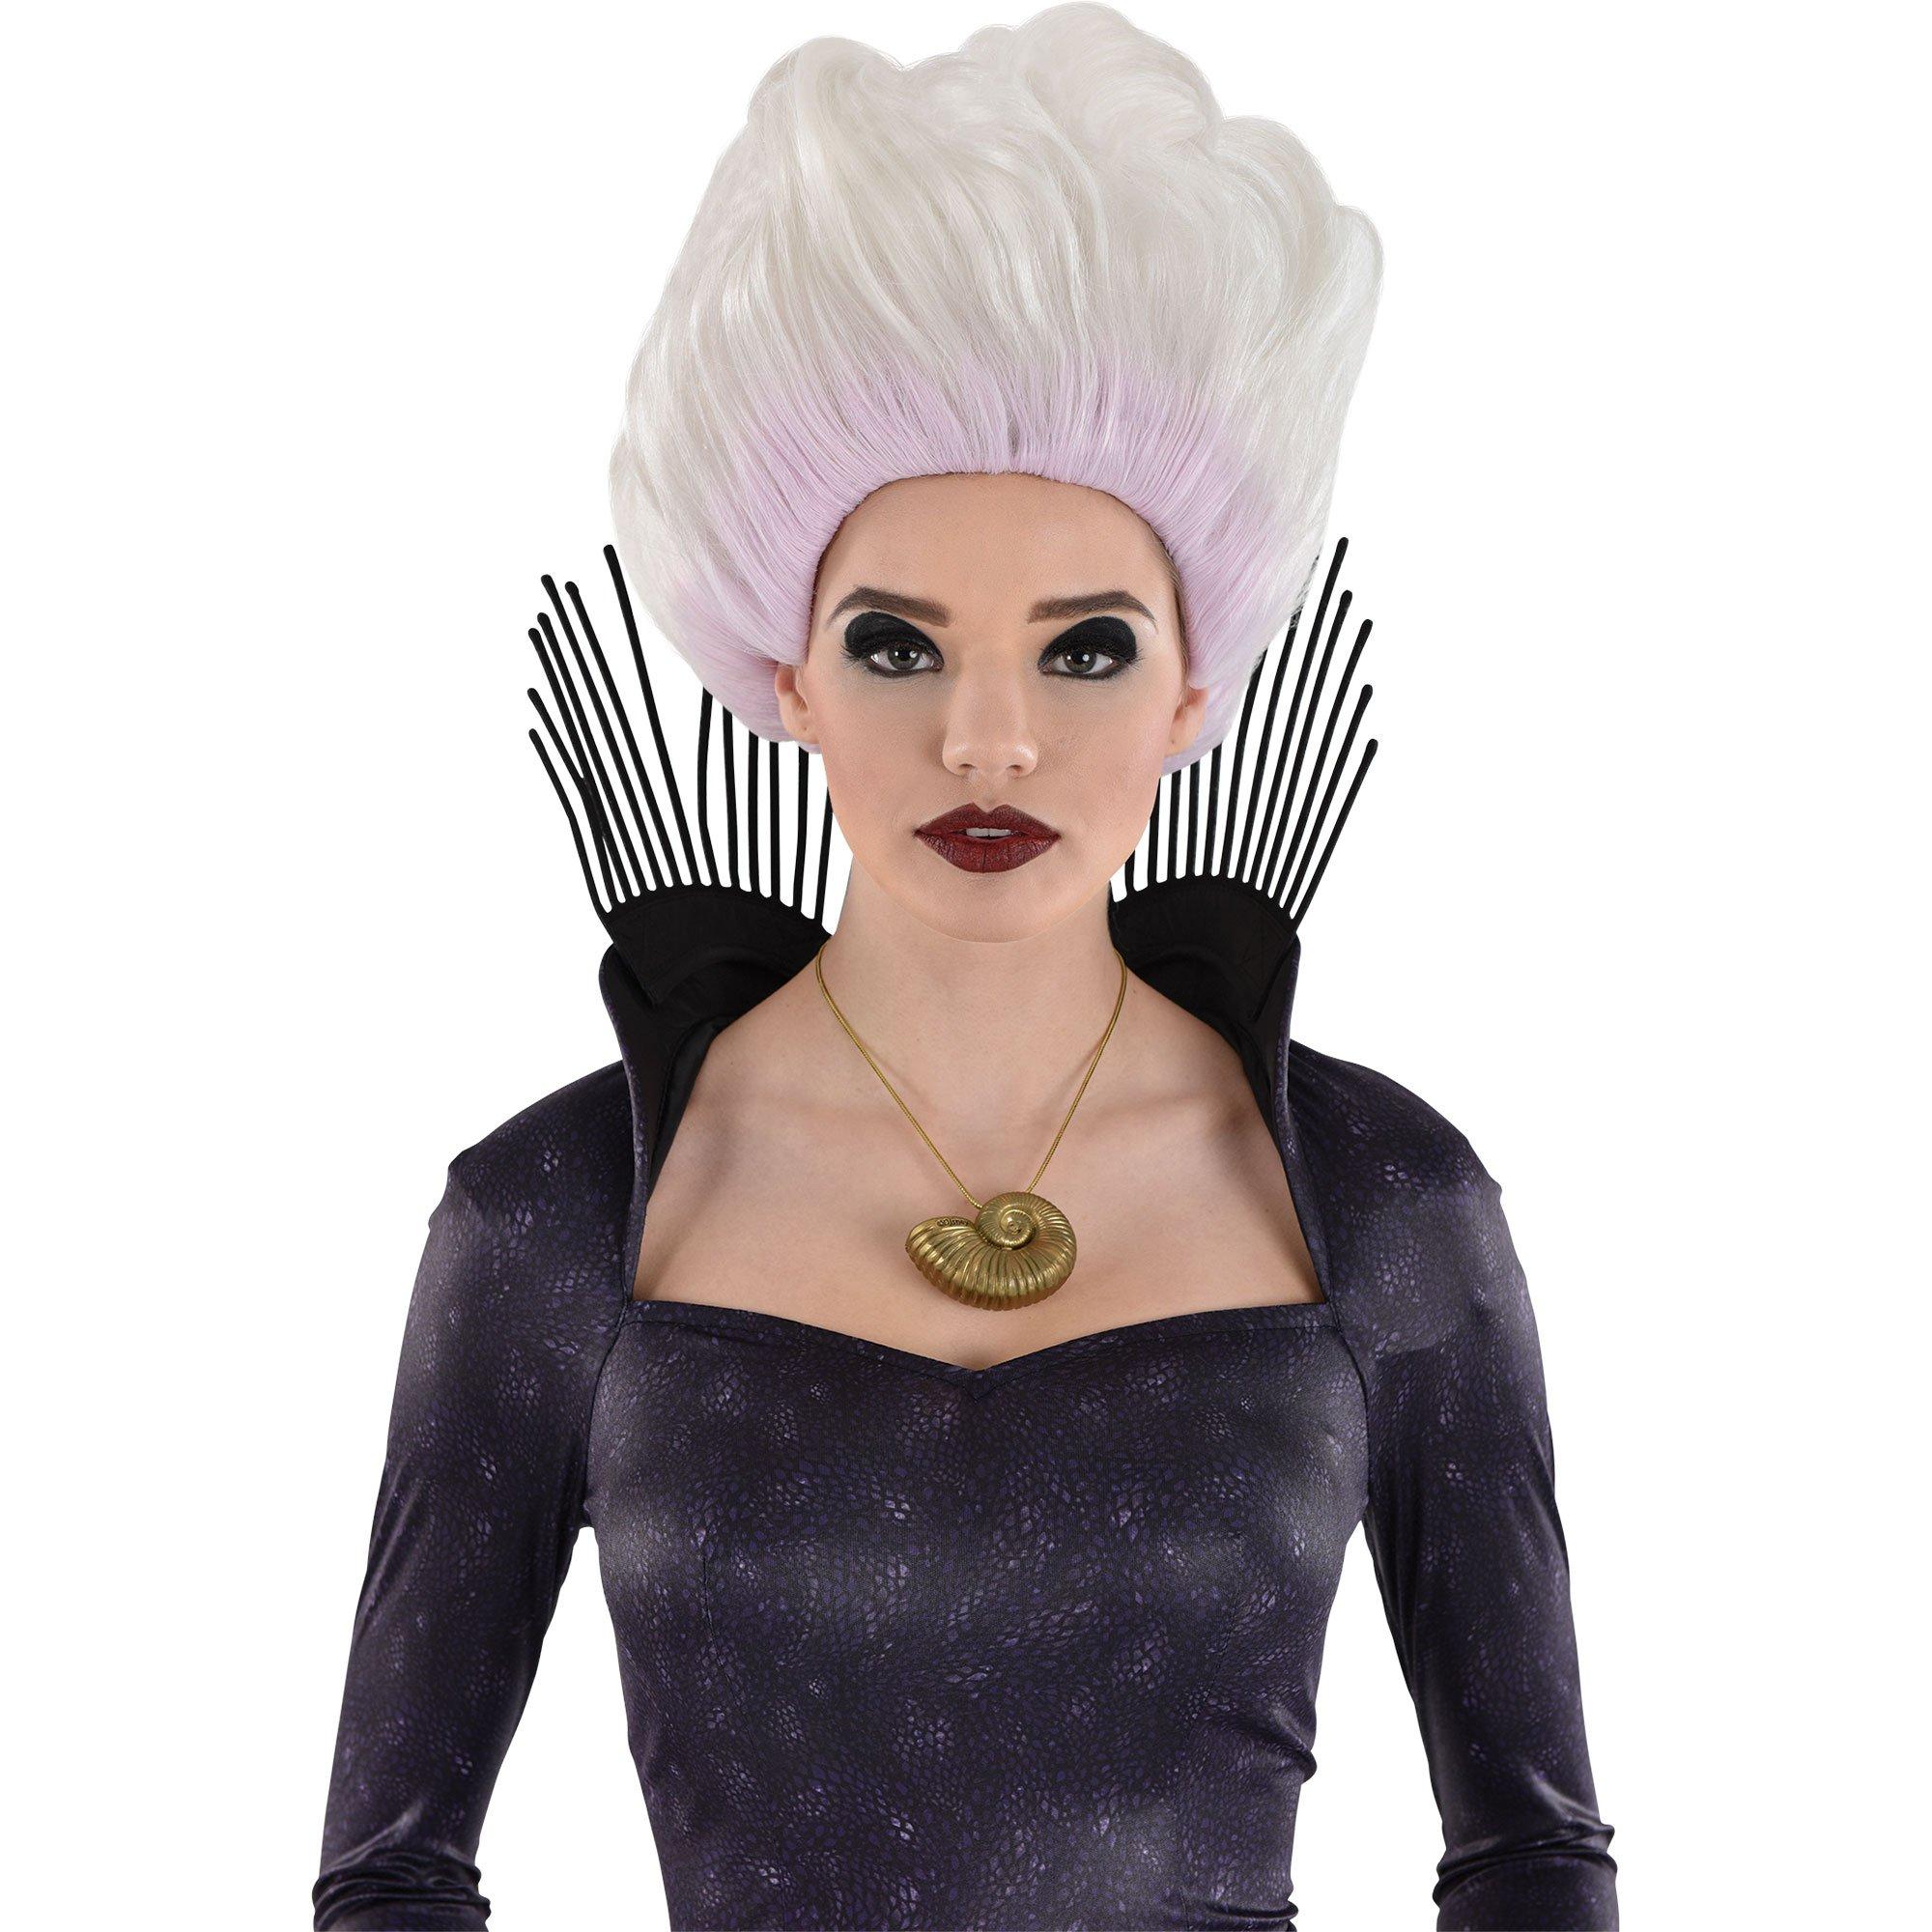 The Mermaid Costume Kit, Burlesque Wig and Plastic Pearl Necklace 